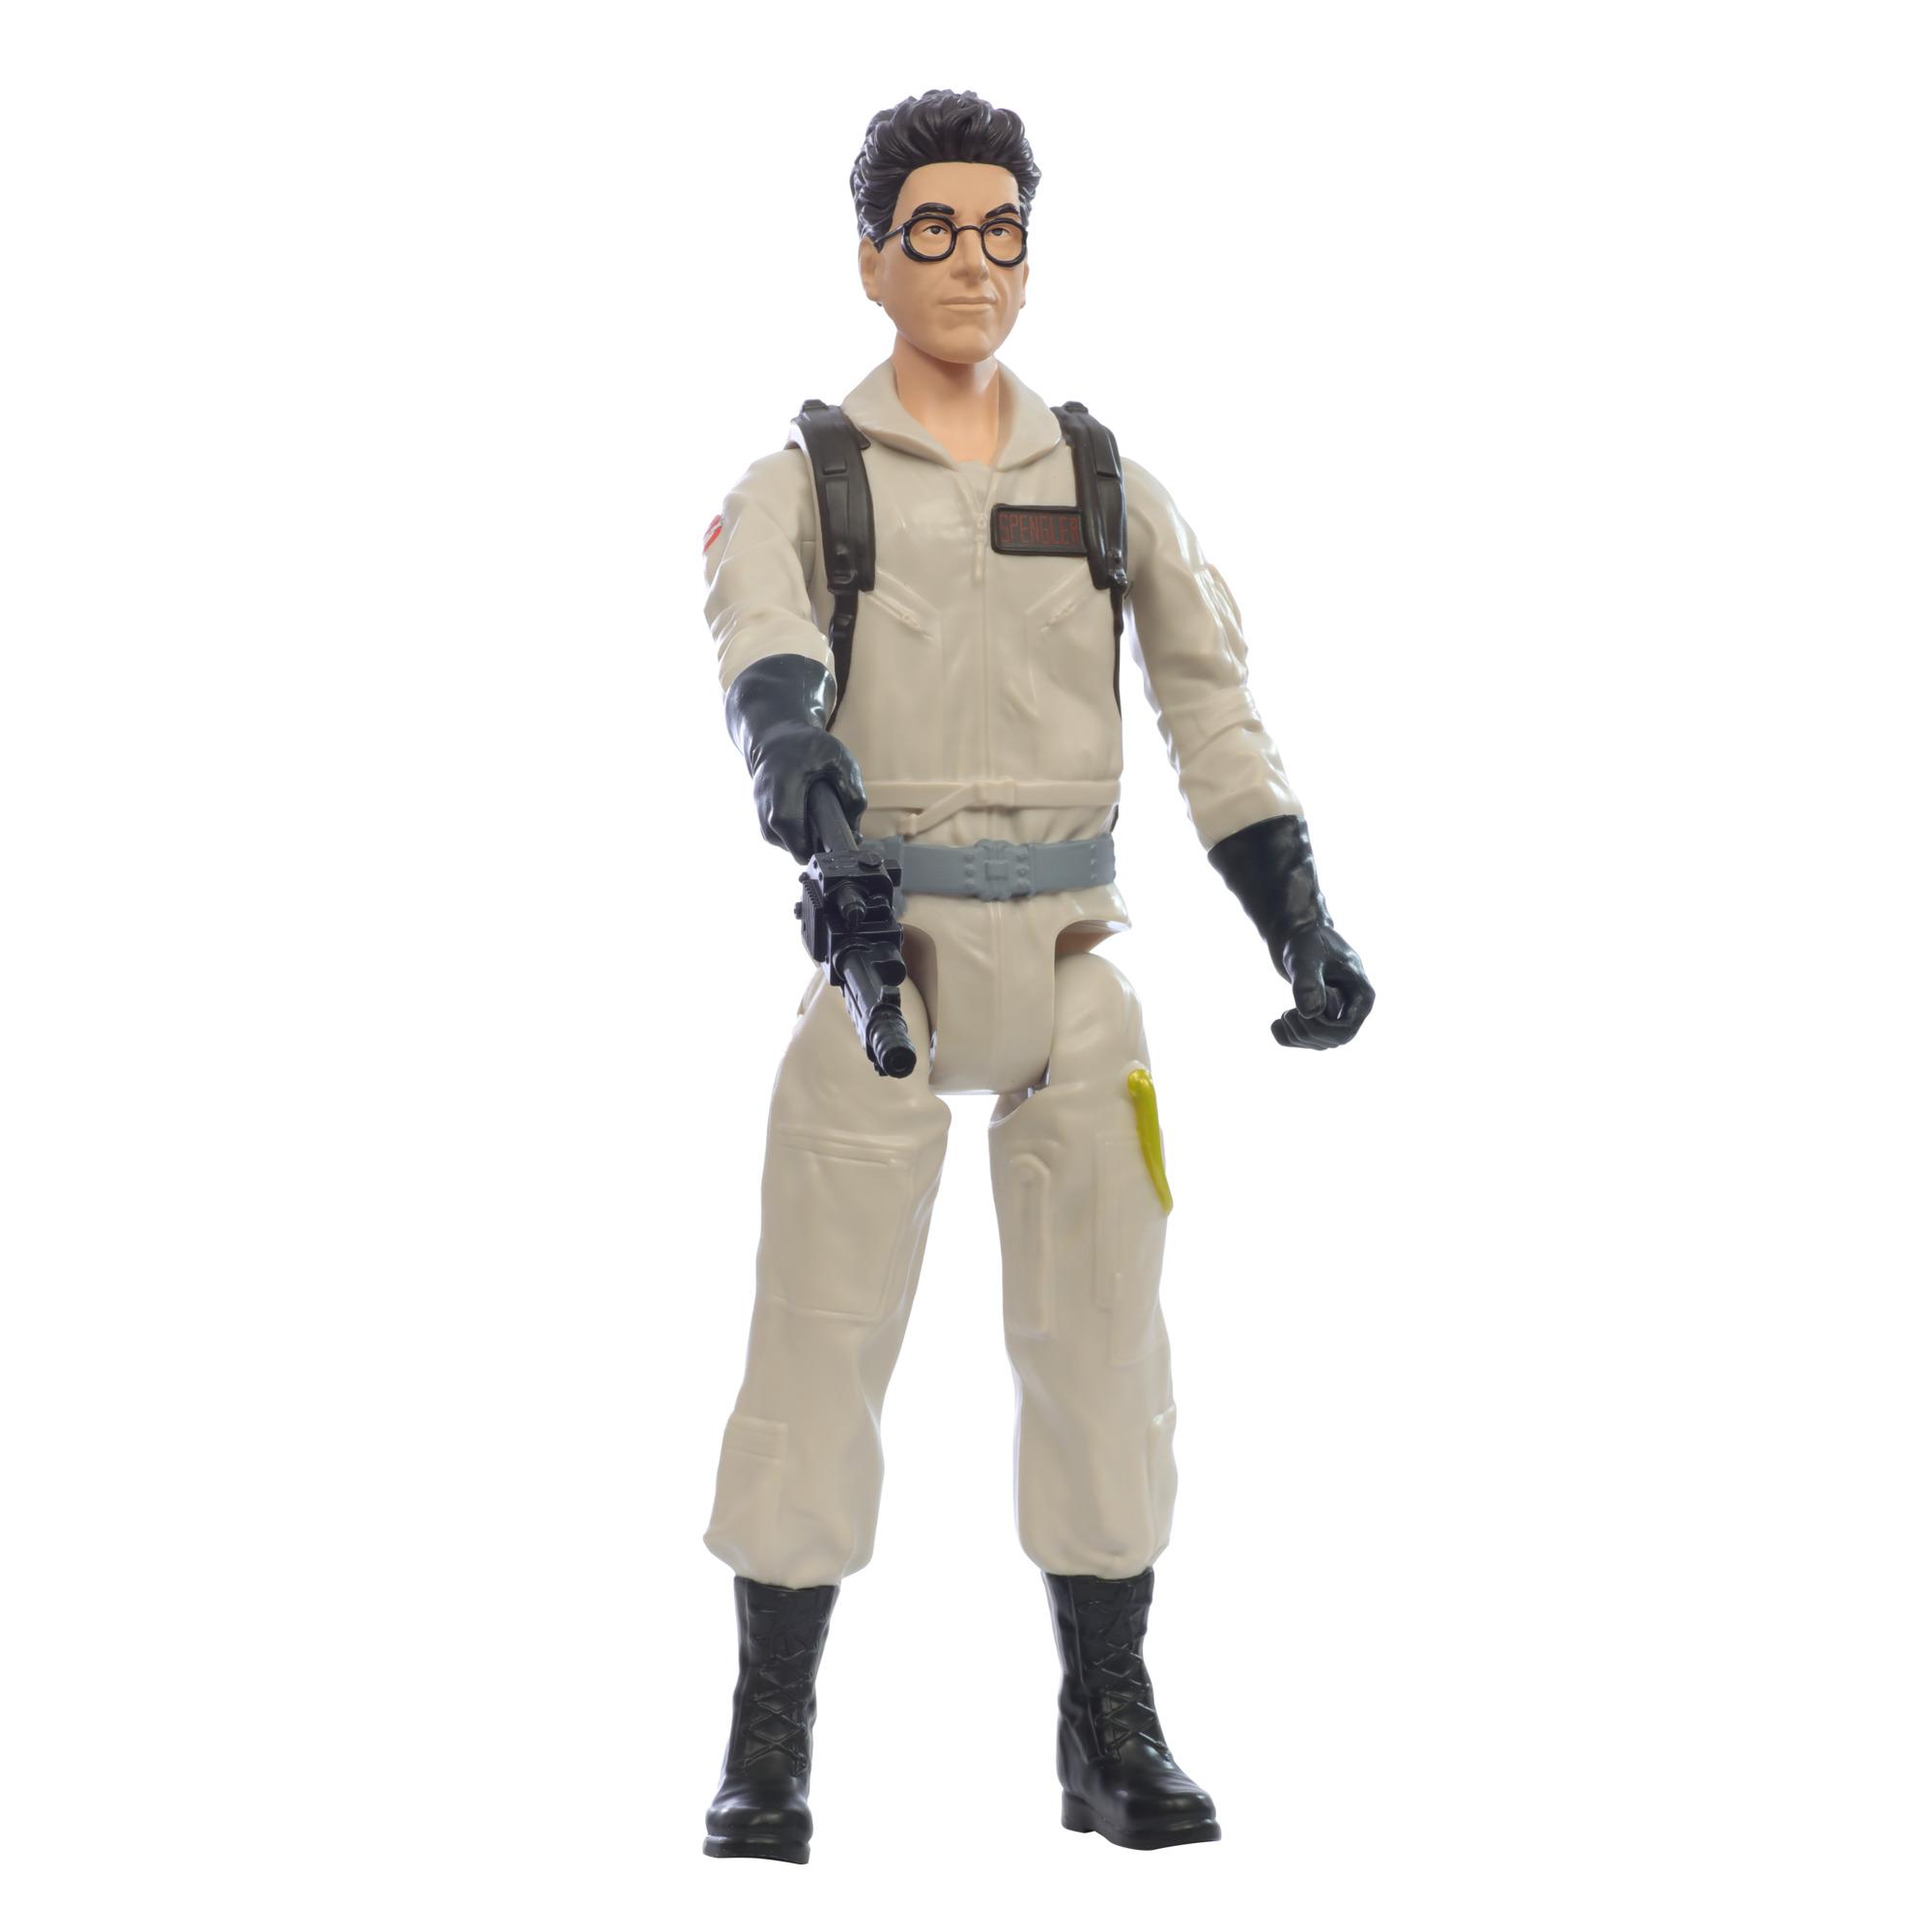 Ghostbusters Egon Spengler Toy 12-Inch-Scale Collectible Classic 1984 Ghostbusters Figure, Toys for Kids Ages 4 and Up